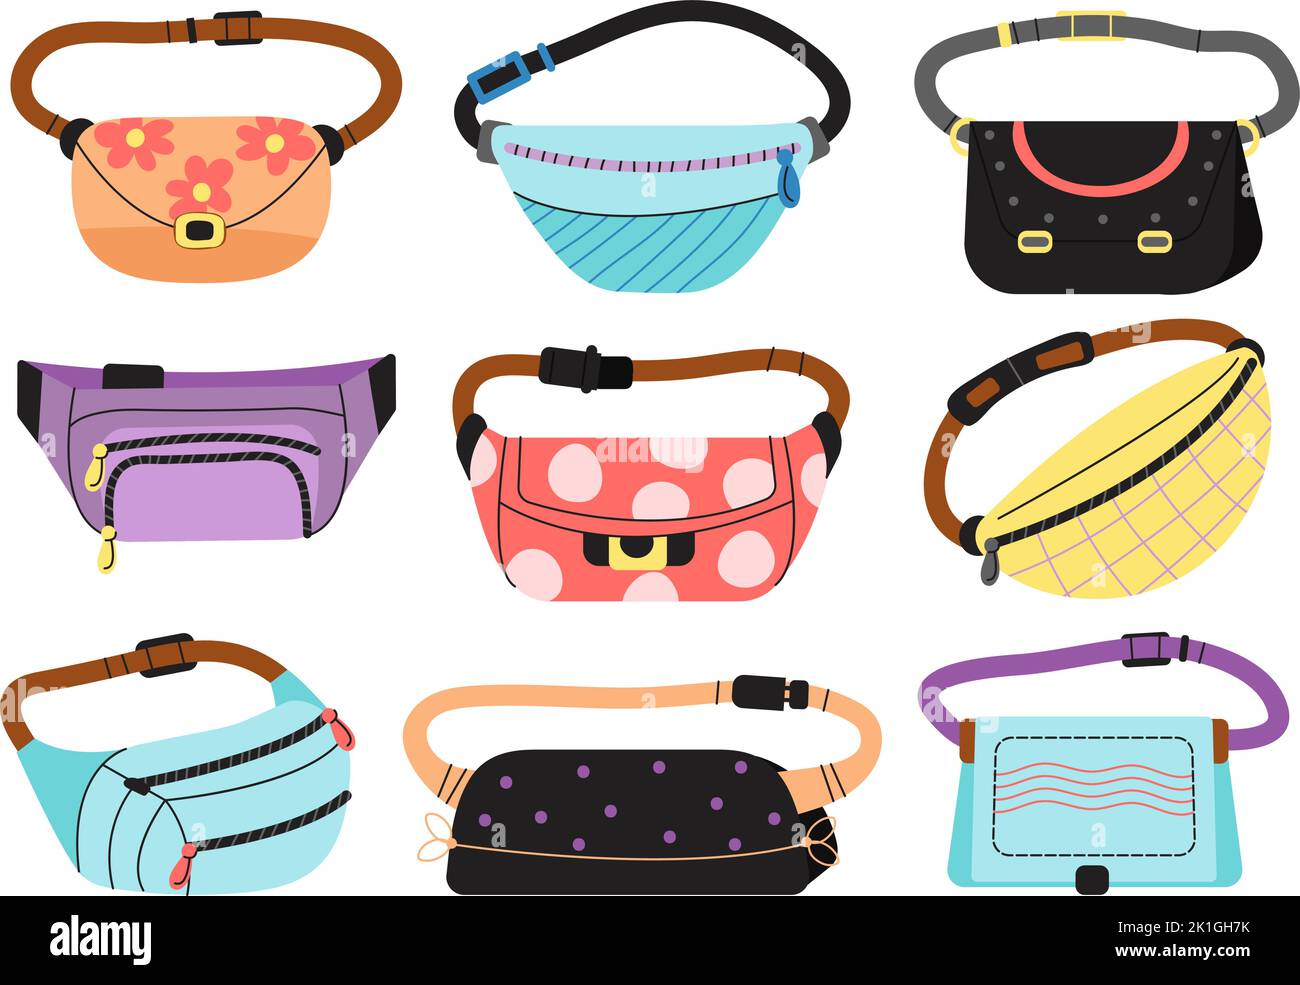 Funny girl waist bag. Wallets bags accessories, cool fashion packed for different things. Cartoon unisex purse, colorful wallet decent vector Stock Vector